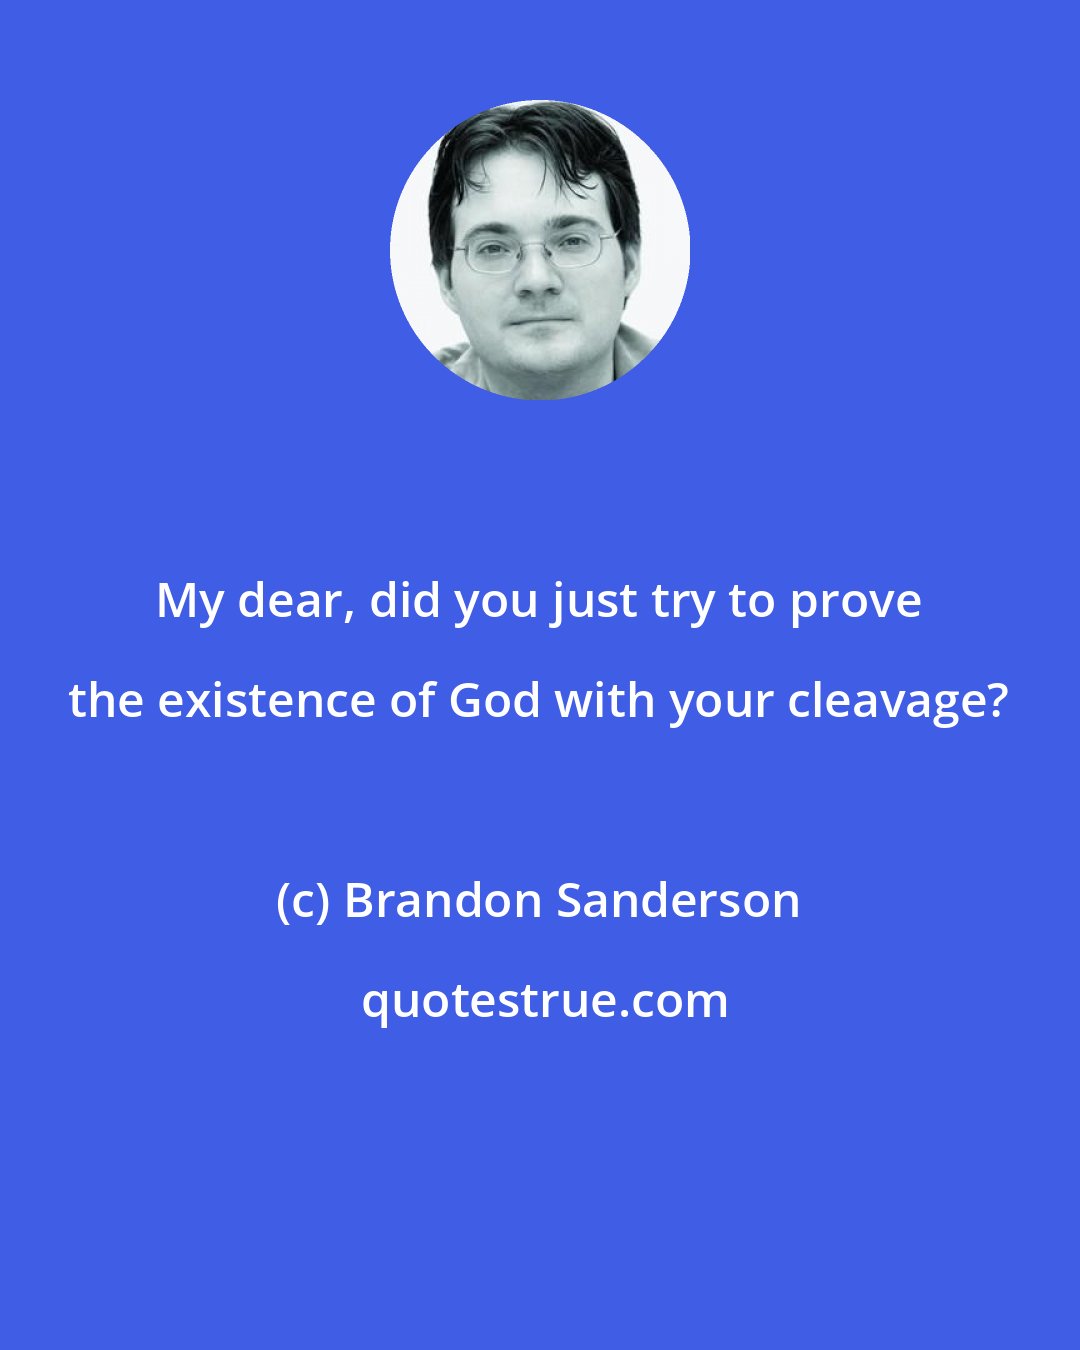 Brandon Sanderson: My dear, did you just try to prove the existence of God with your cleavage?